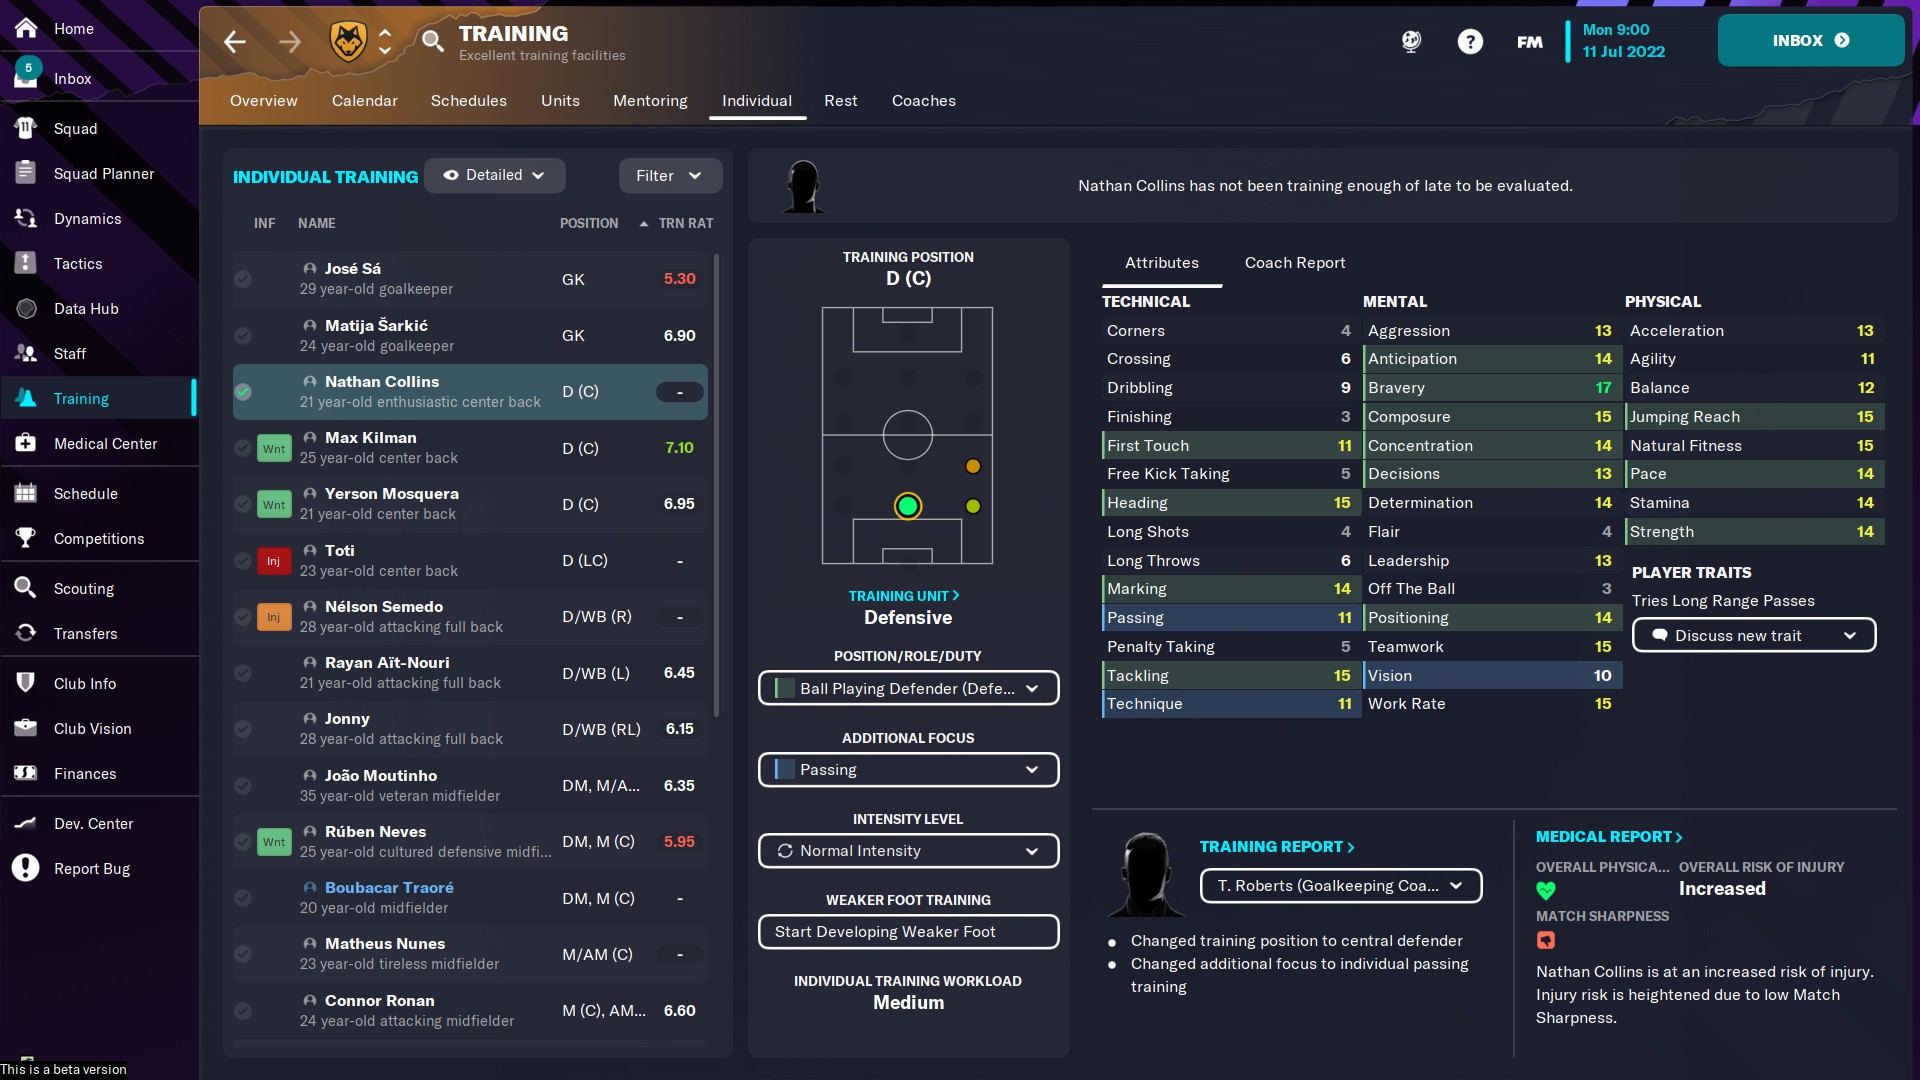 Football Manager 2023 - Guide to Managing a New Club - Training - 01E34C7